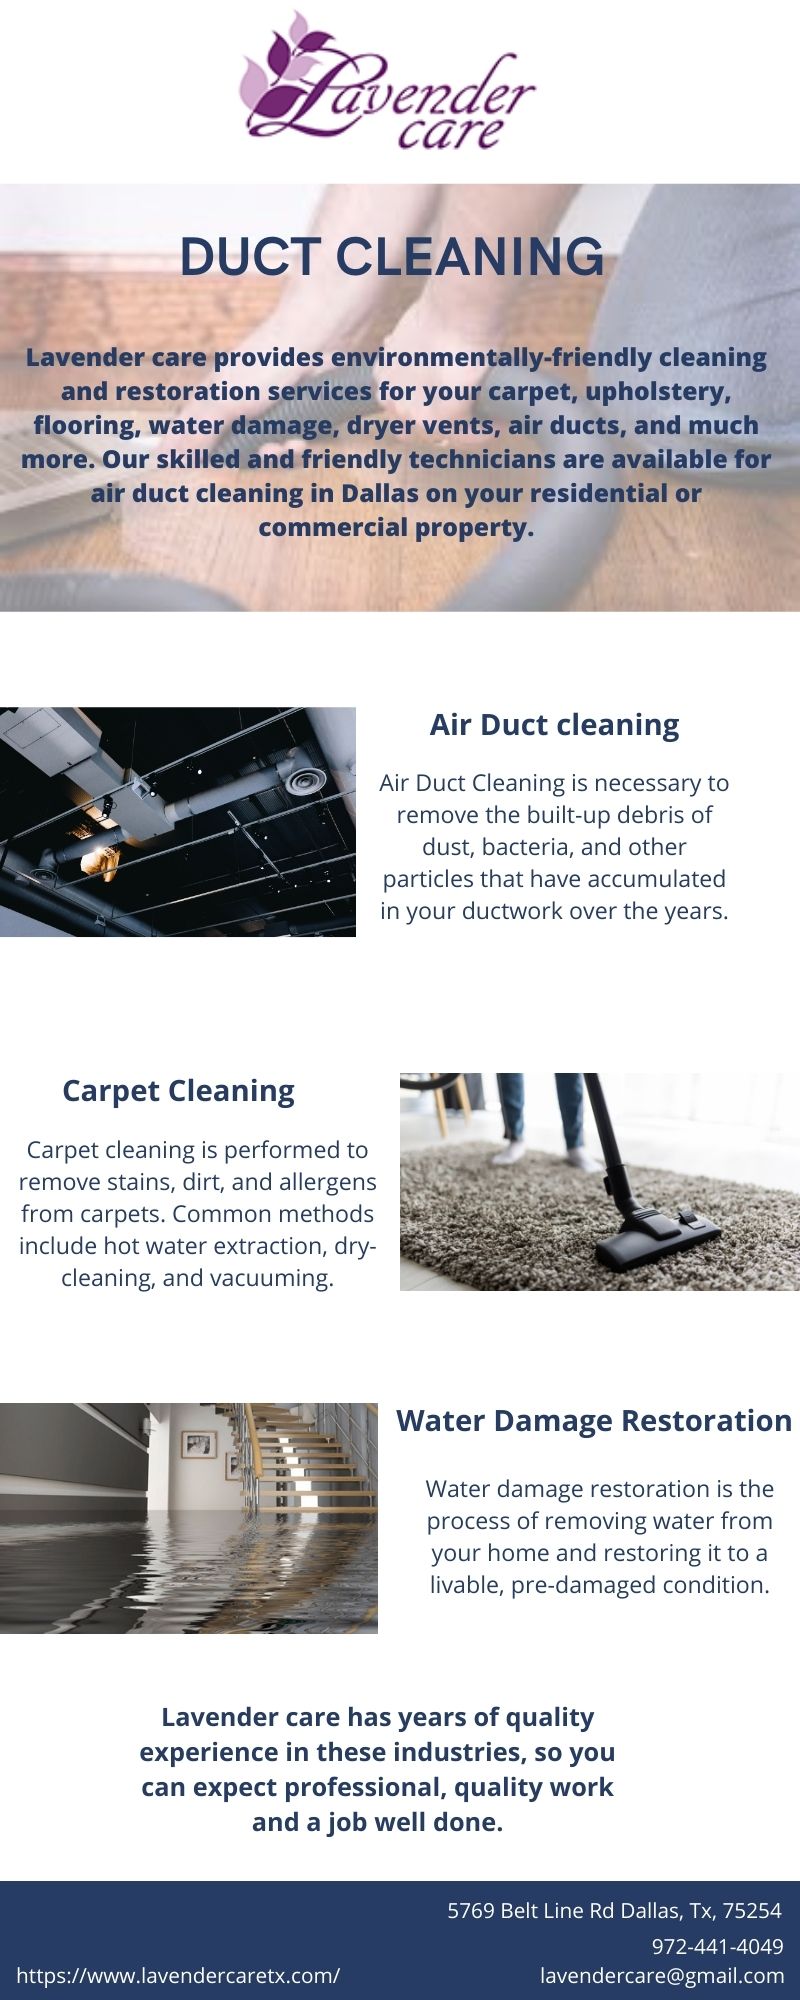 Air Duct Cleaning Services In Dallas